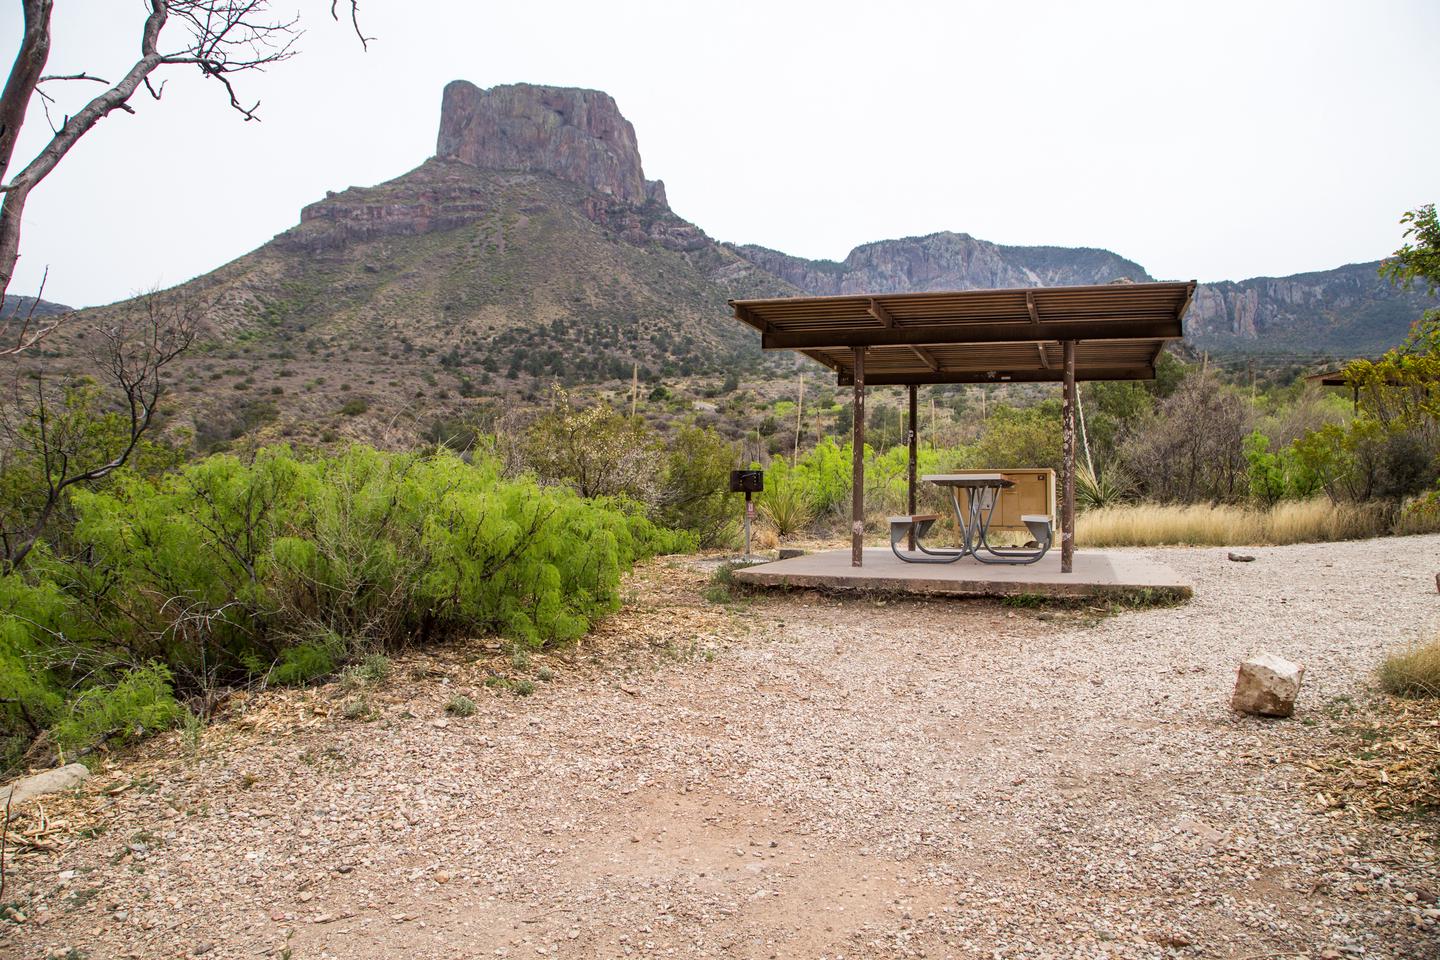 Shade shelter in site with view of Casa Grande in background